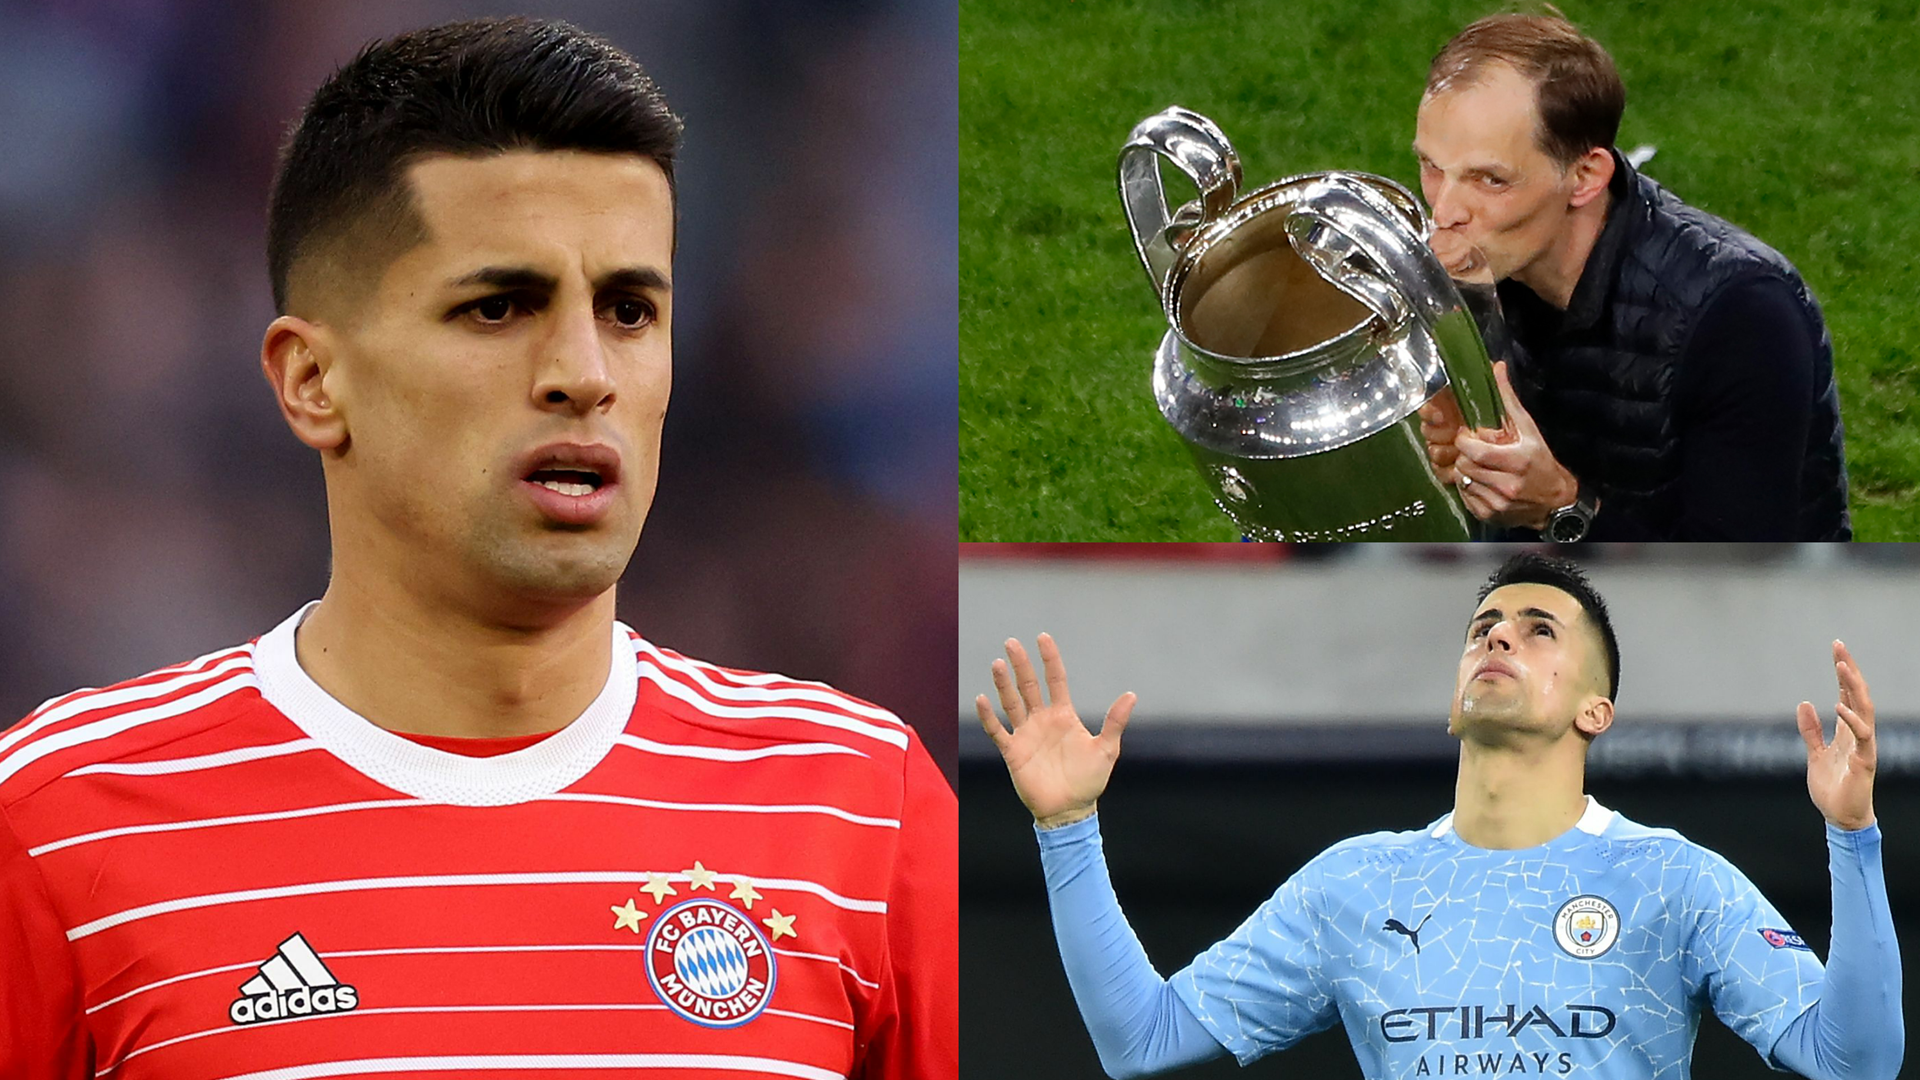 'He made me lose a Champions League final!' - Joao Cancelo reacts to Thomas Tuchel becoming his new boss at Bayern Munich